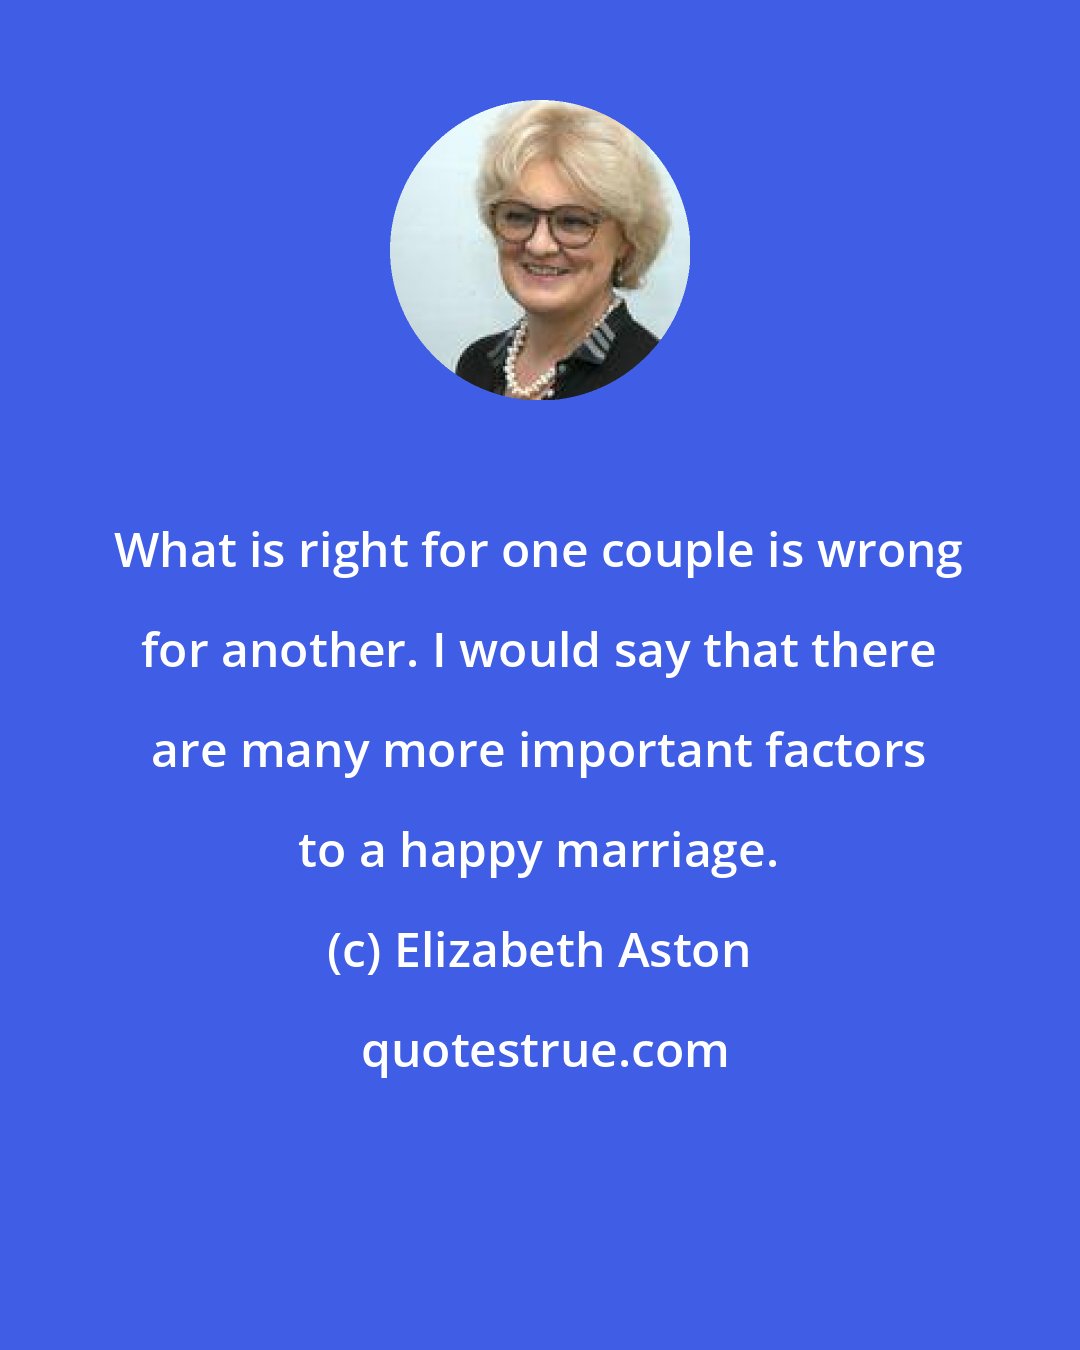 Elizabeth Aston: What is right for one couple is wrong for another. I would say that there are many more important factors to a happy marriage.